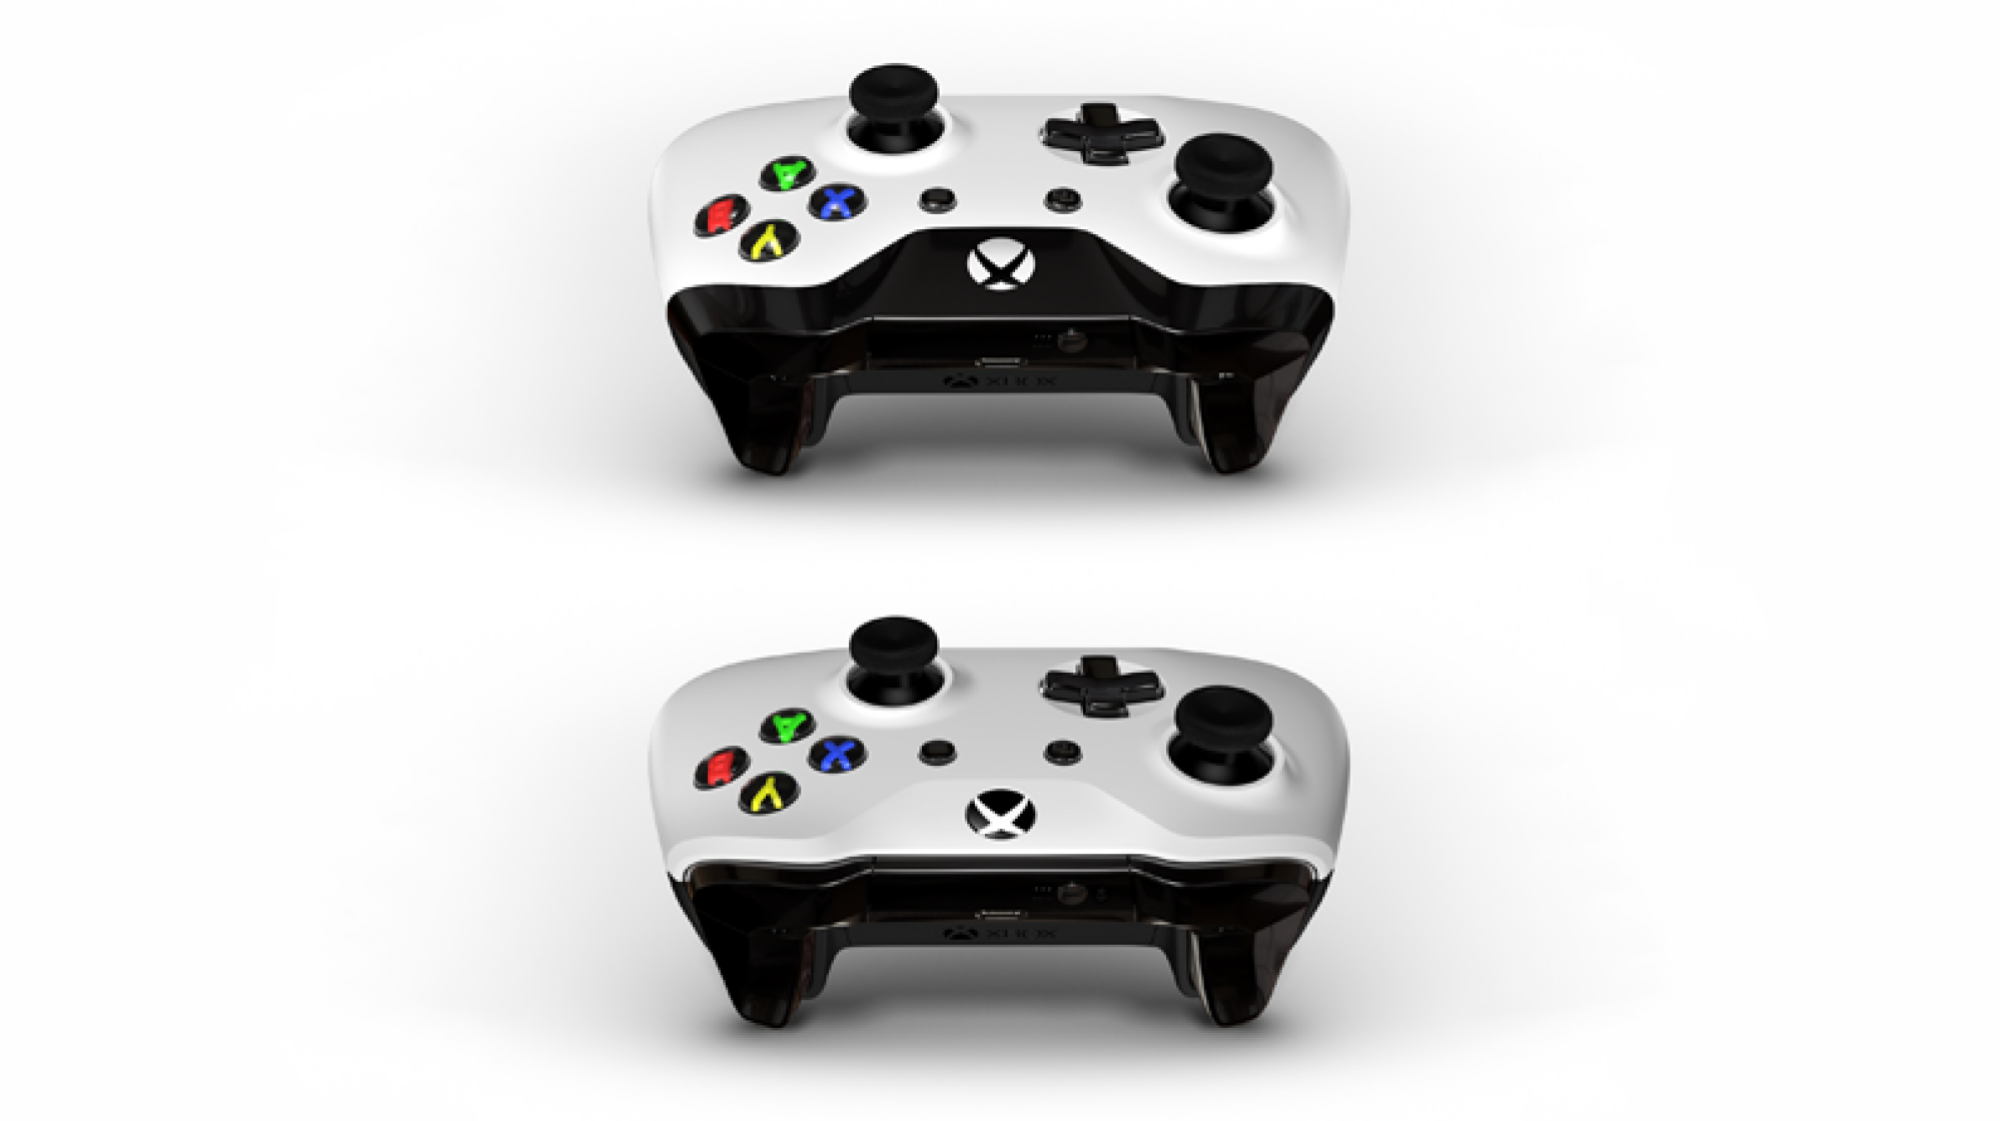 Xbox controllers demonstrating Bluetooth capability